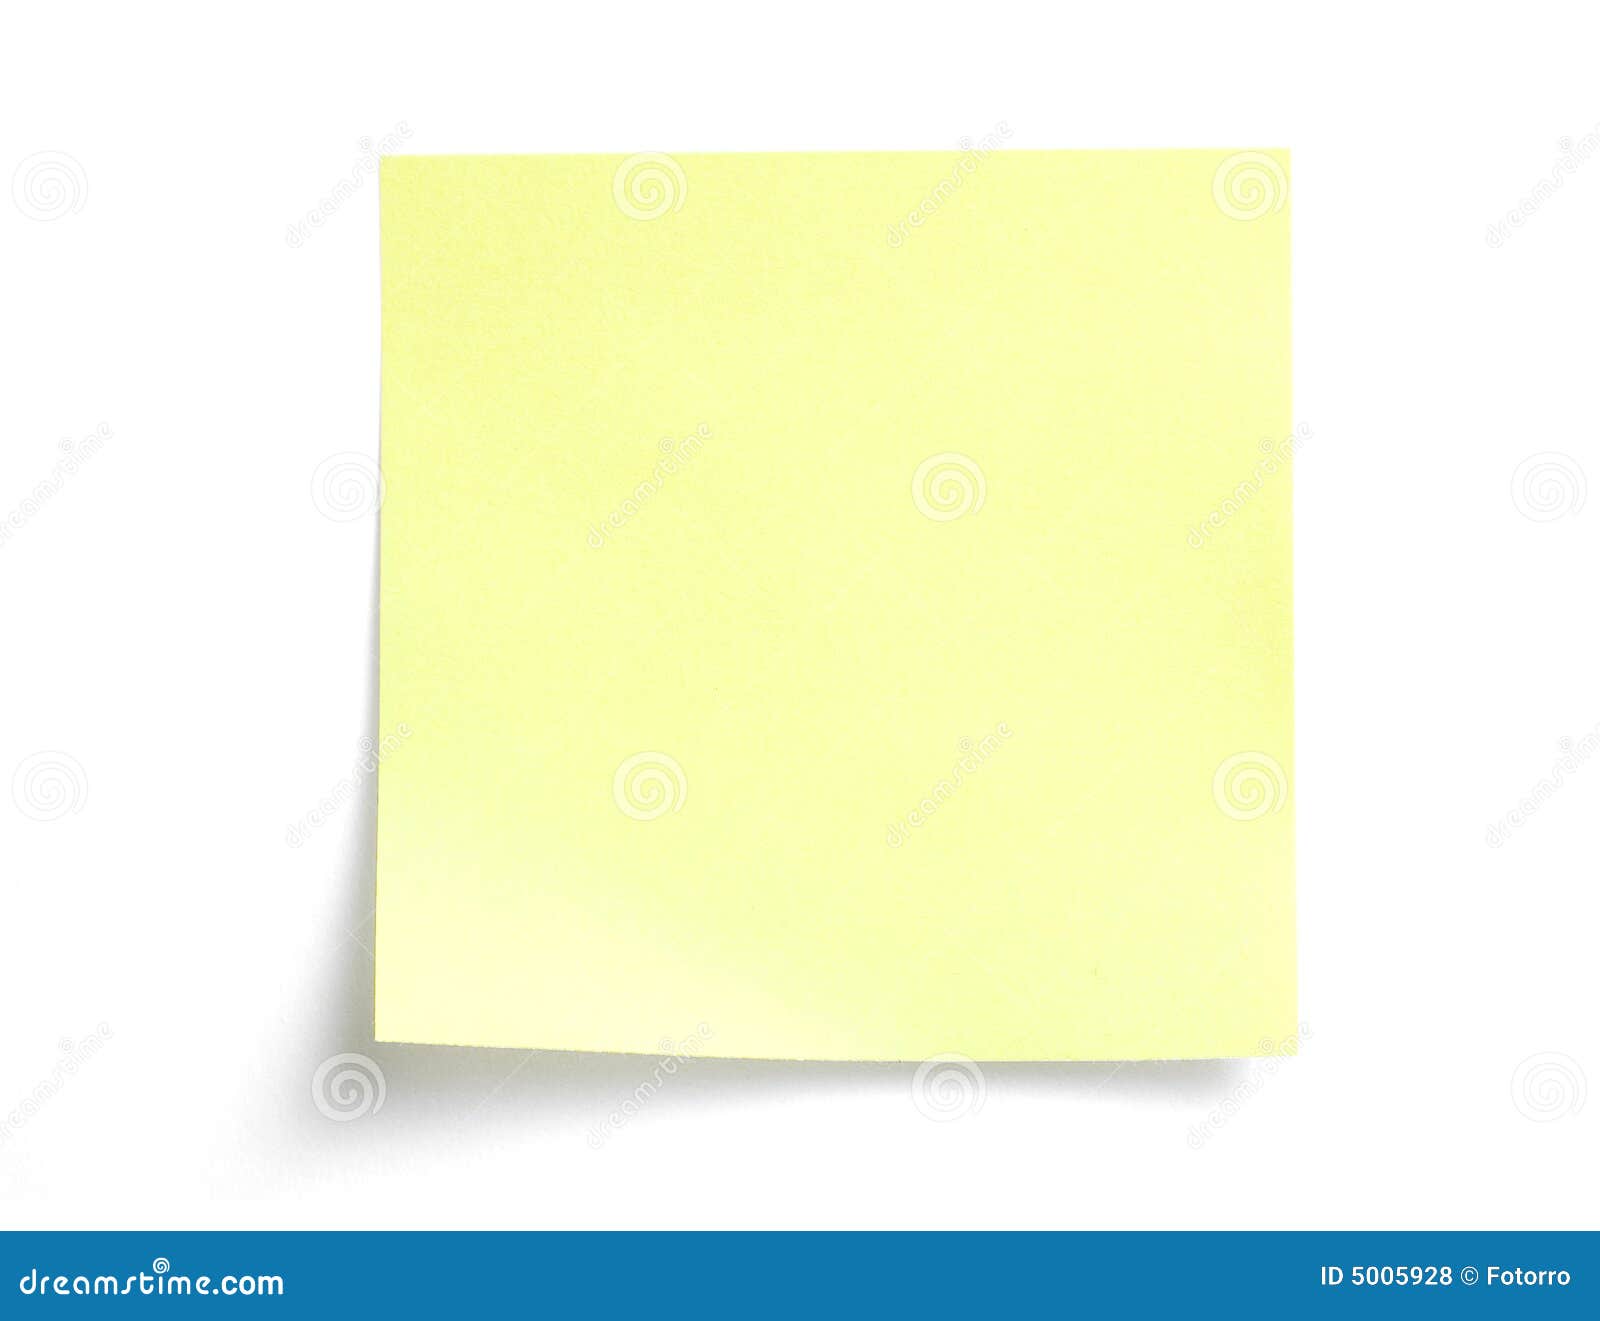 yellow sticky note on white